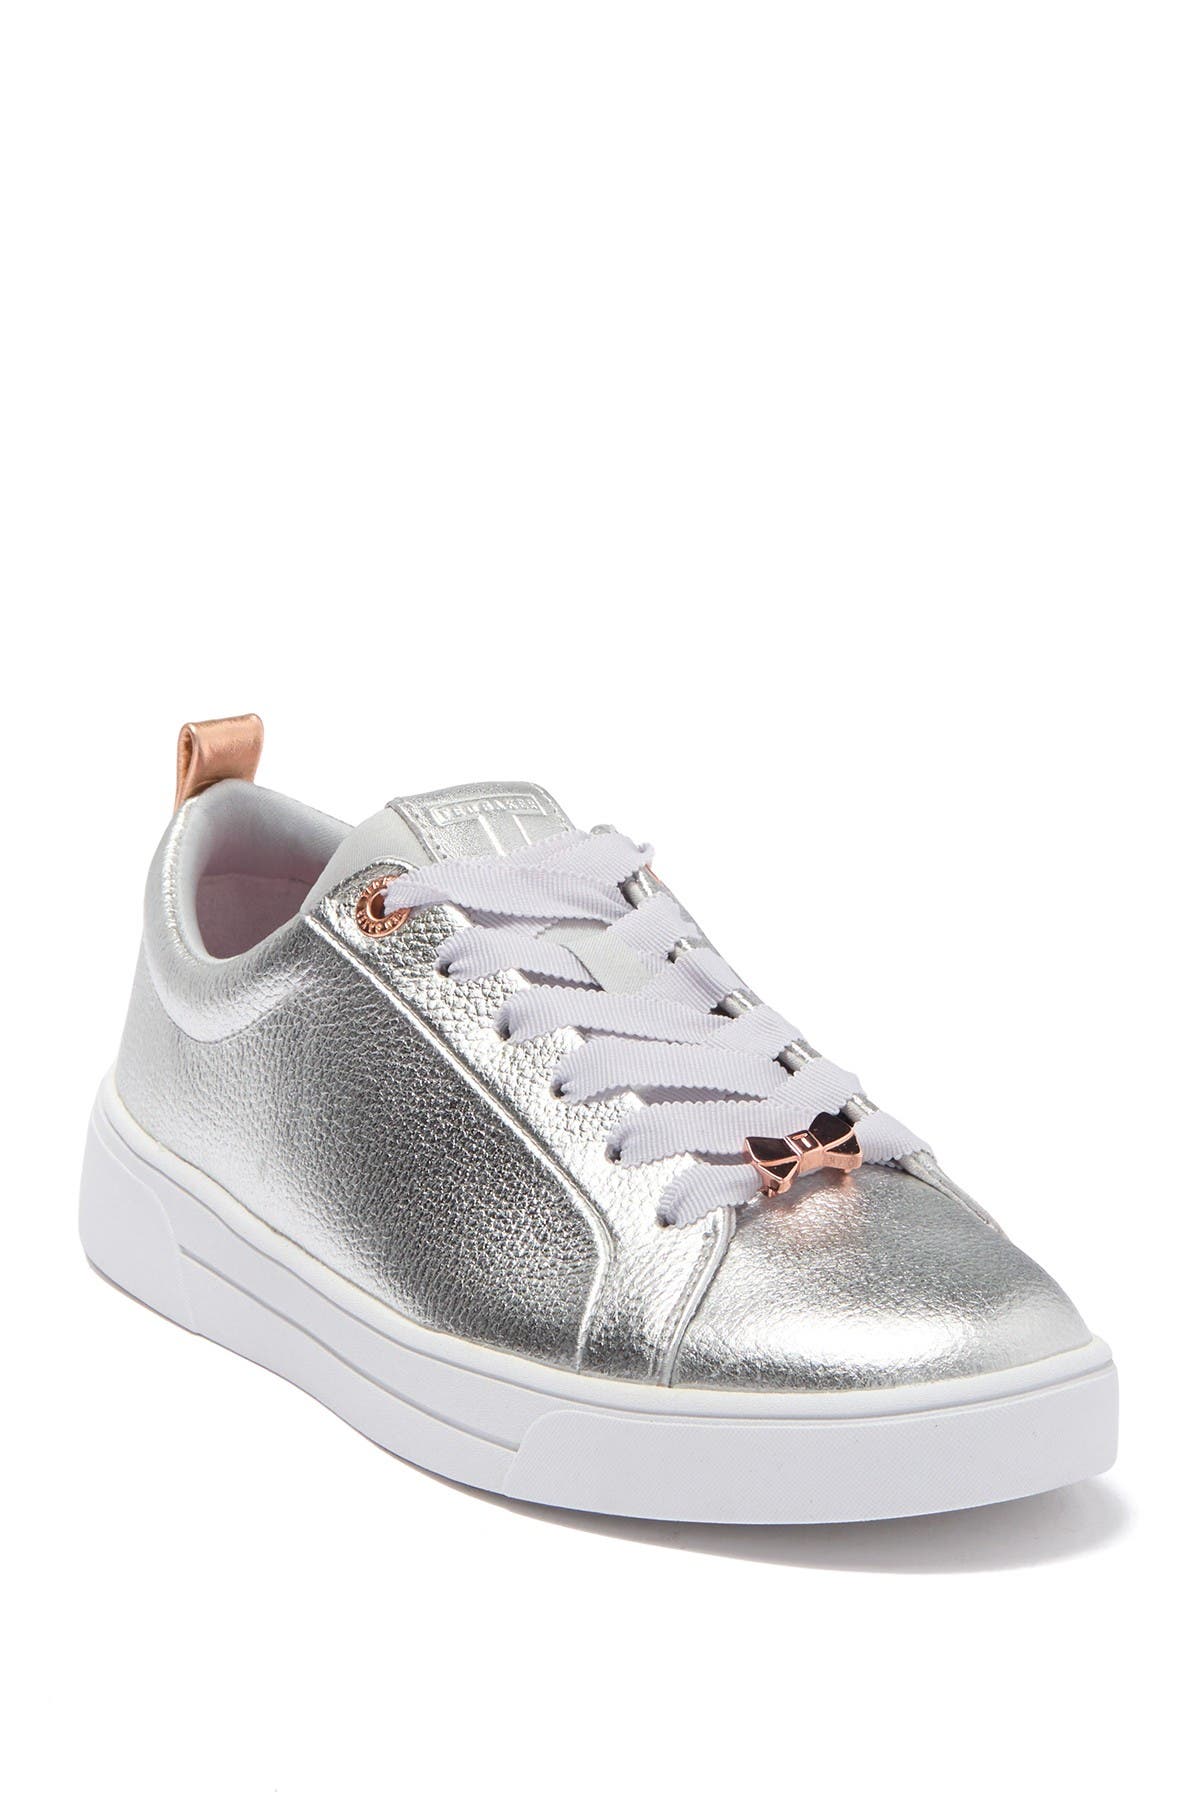 nordstrom rack silver shoes